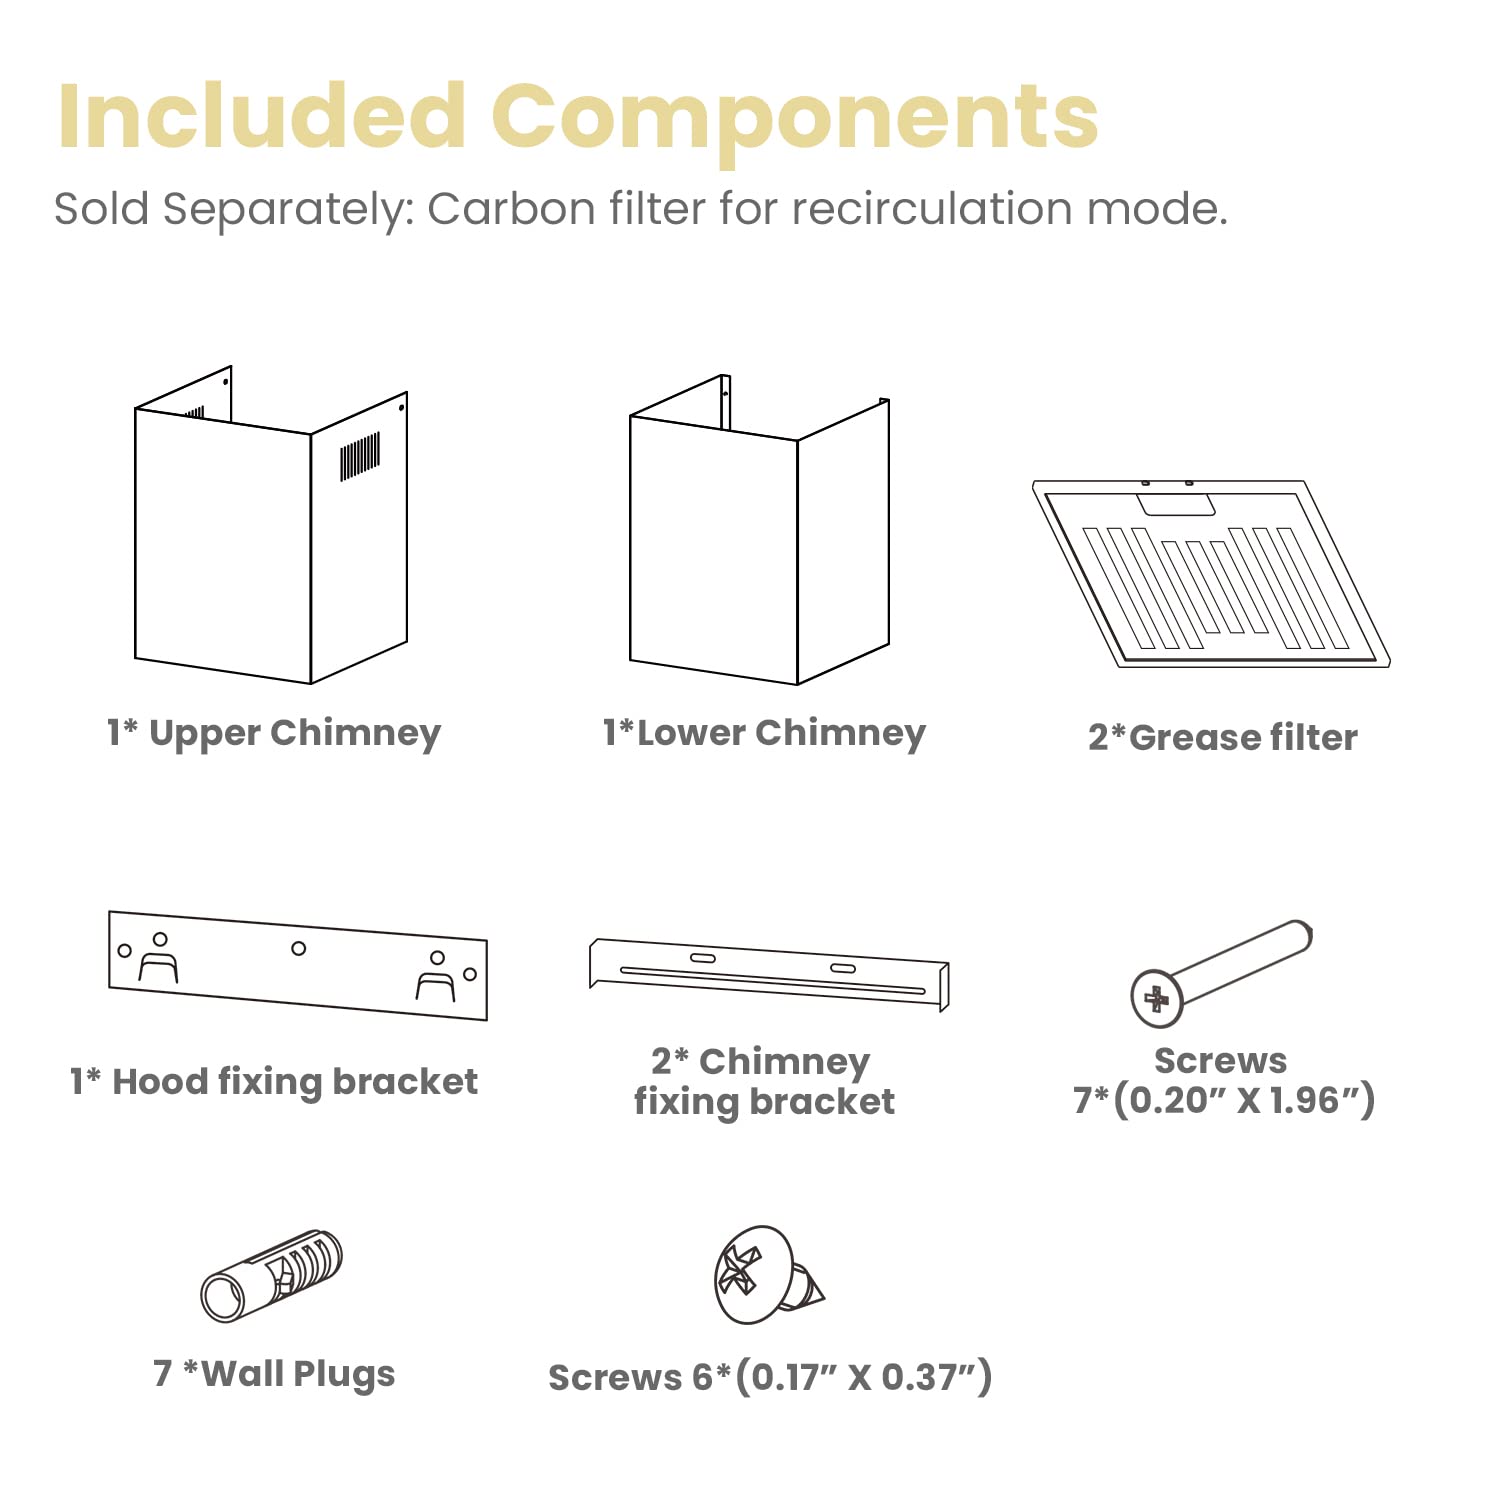 parts included with the comfee curved glass range hood